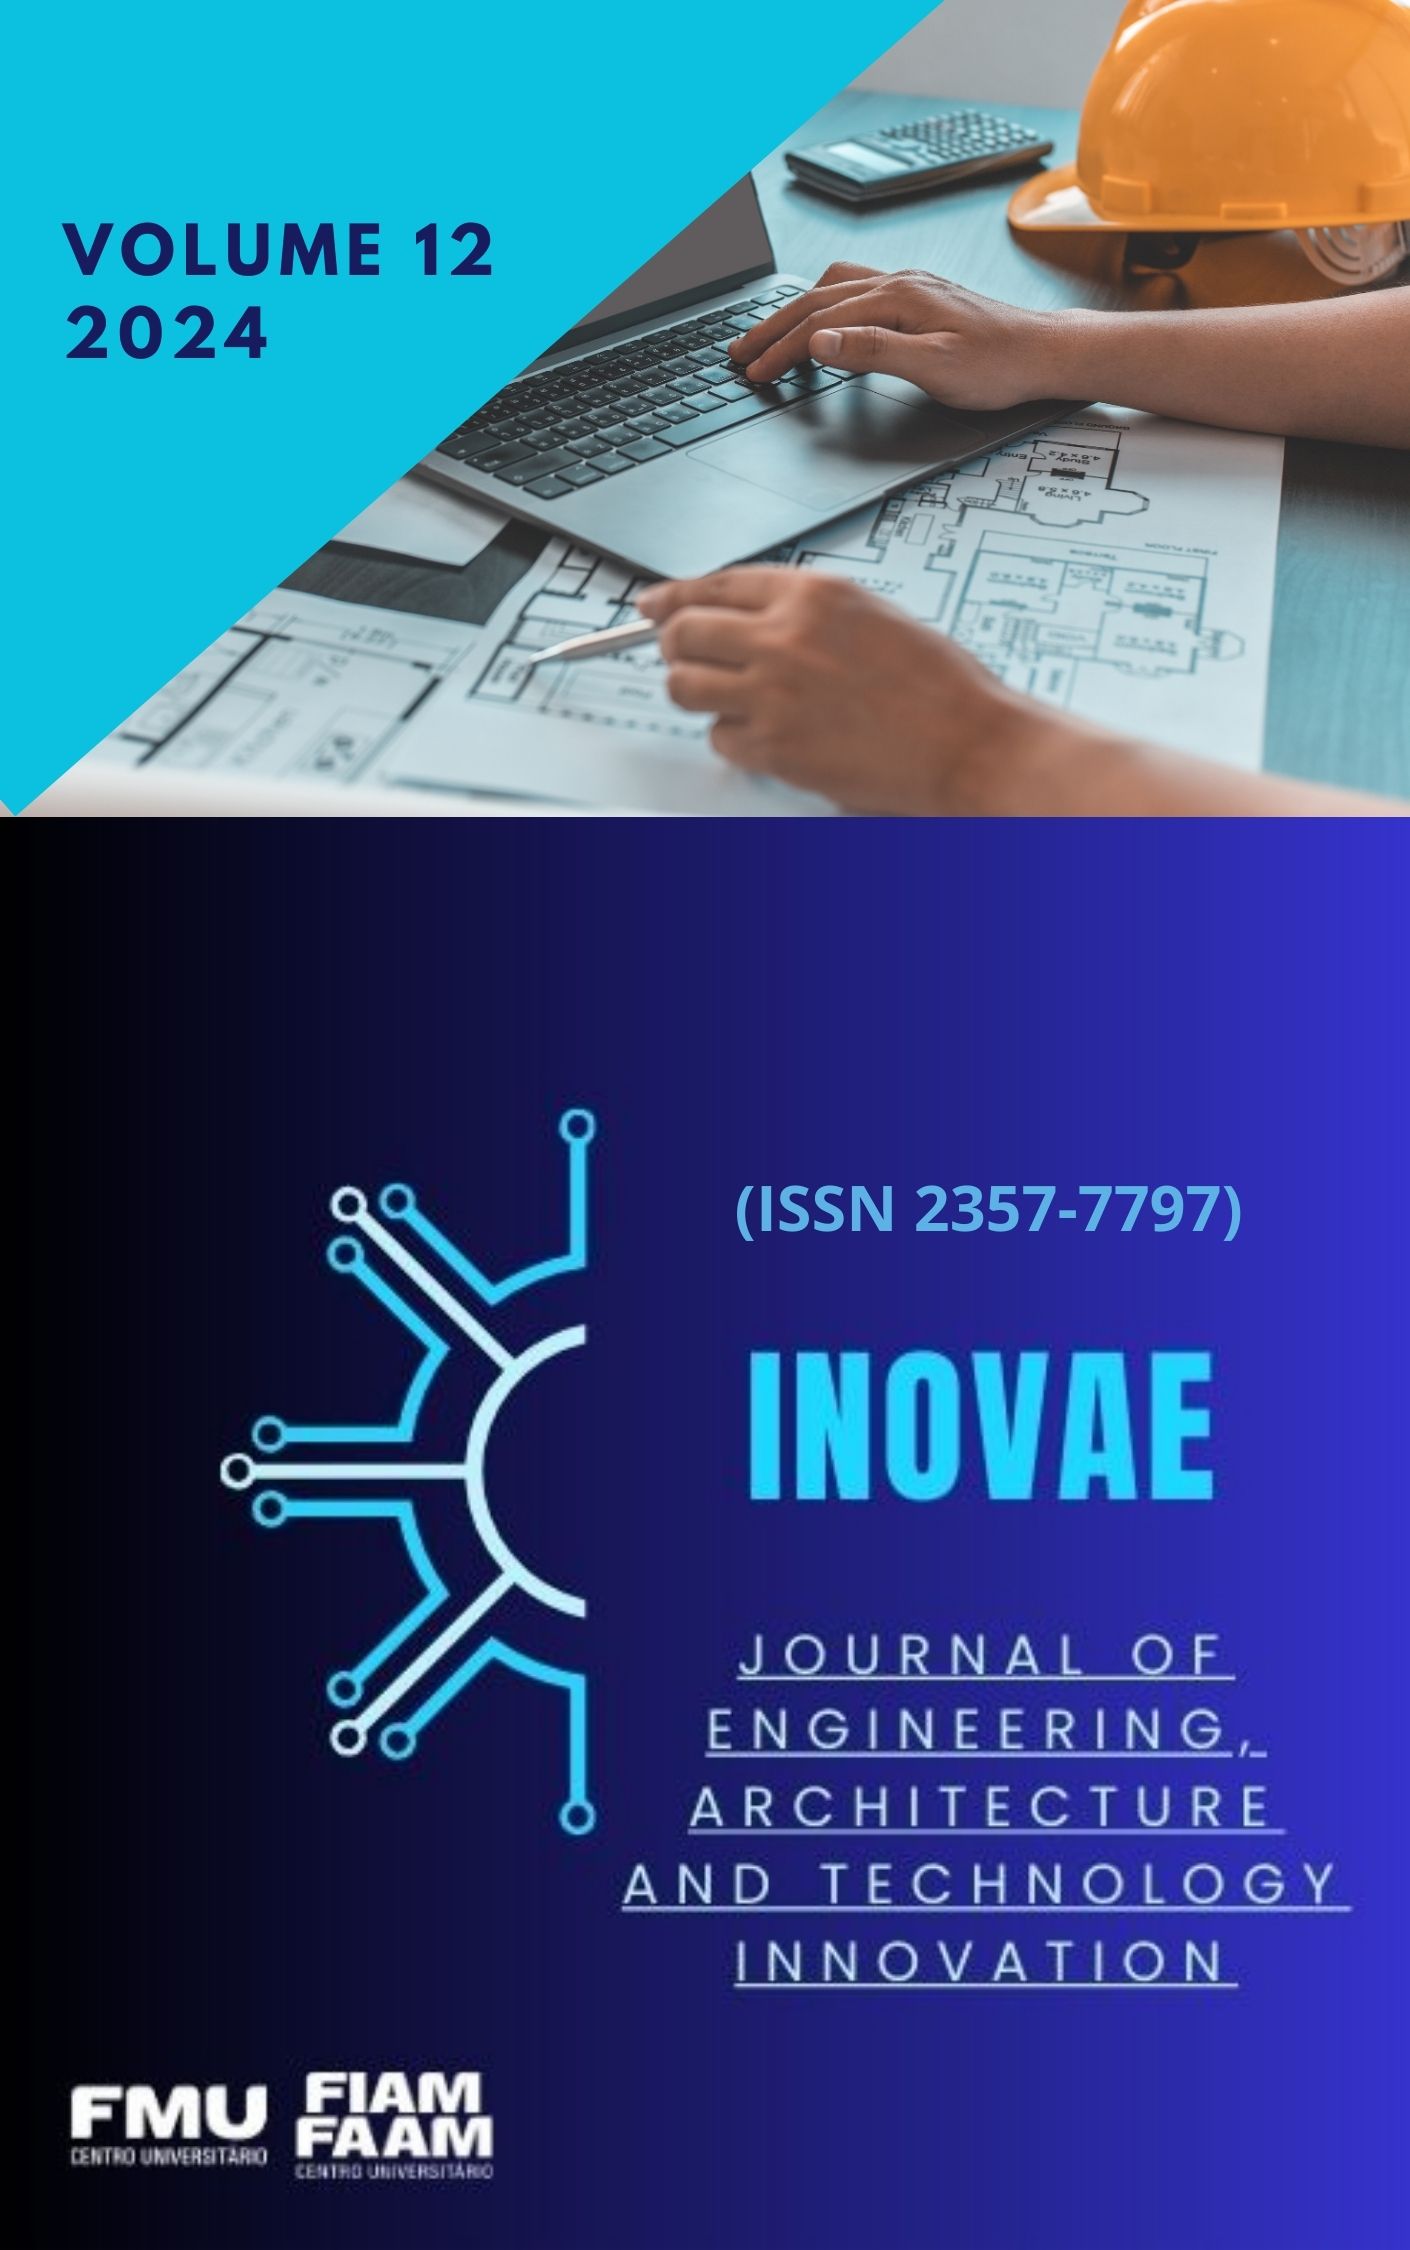 					Visualizar v. 12 n. 1 (2024): INOVAE - Journal of Engineering, Architecture and Technology Innovation (ISSN 2357-7797)
				